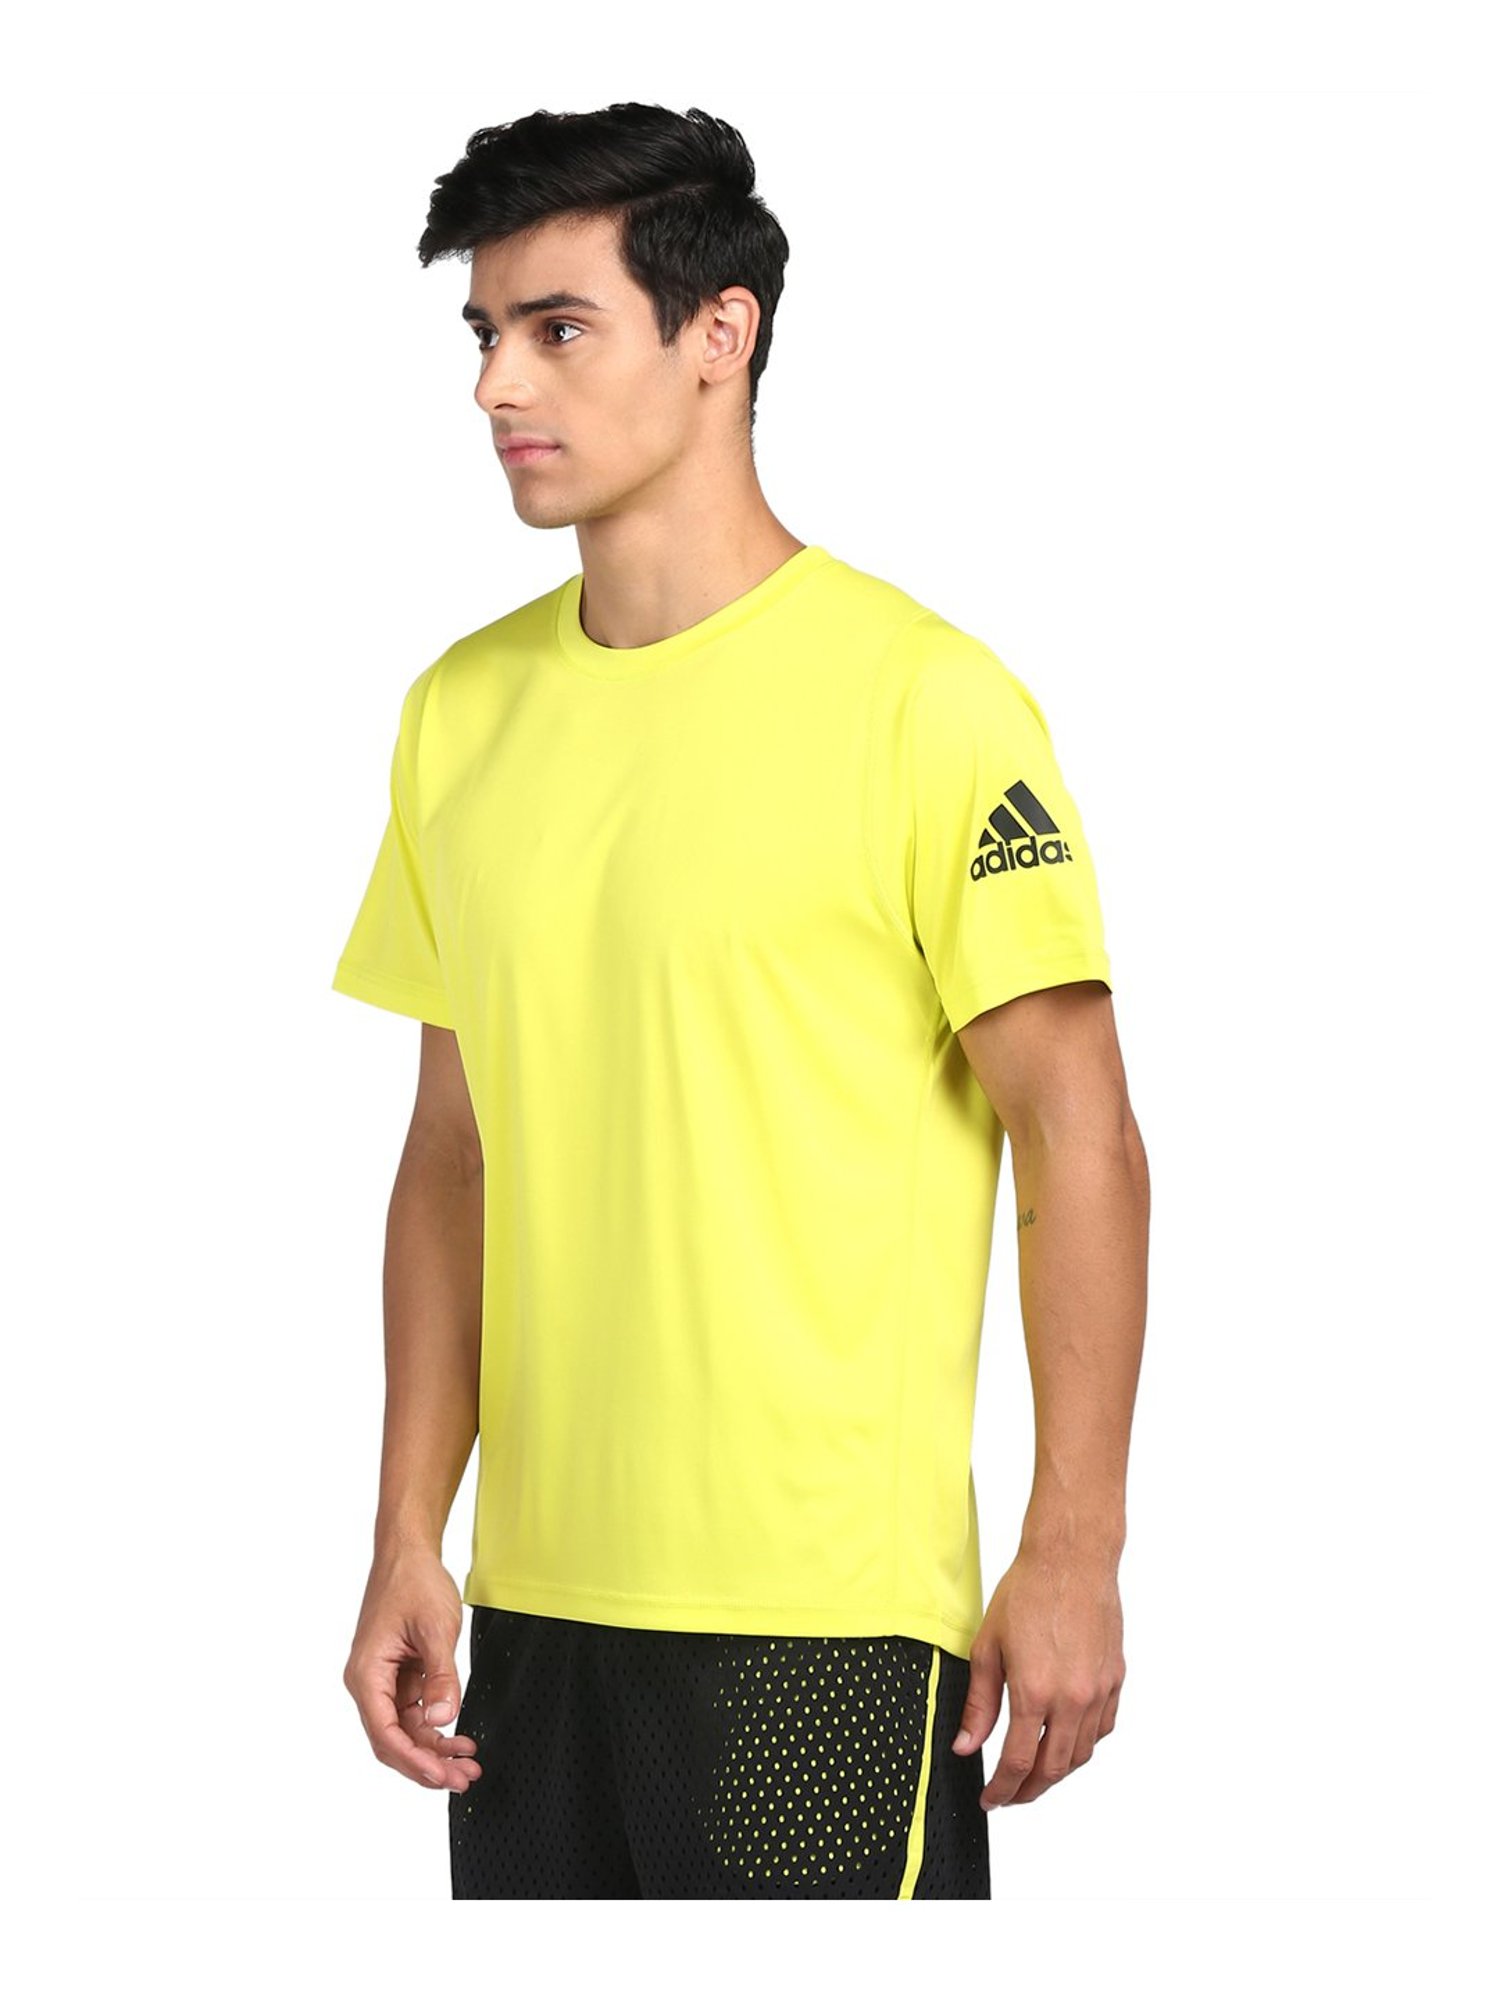 Adidas Blues Playmaker Tee Athletic Yellow S Mens